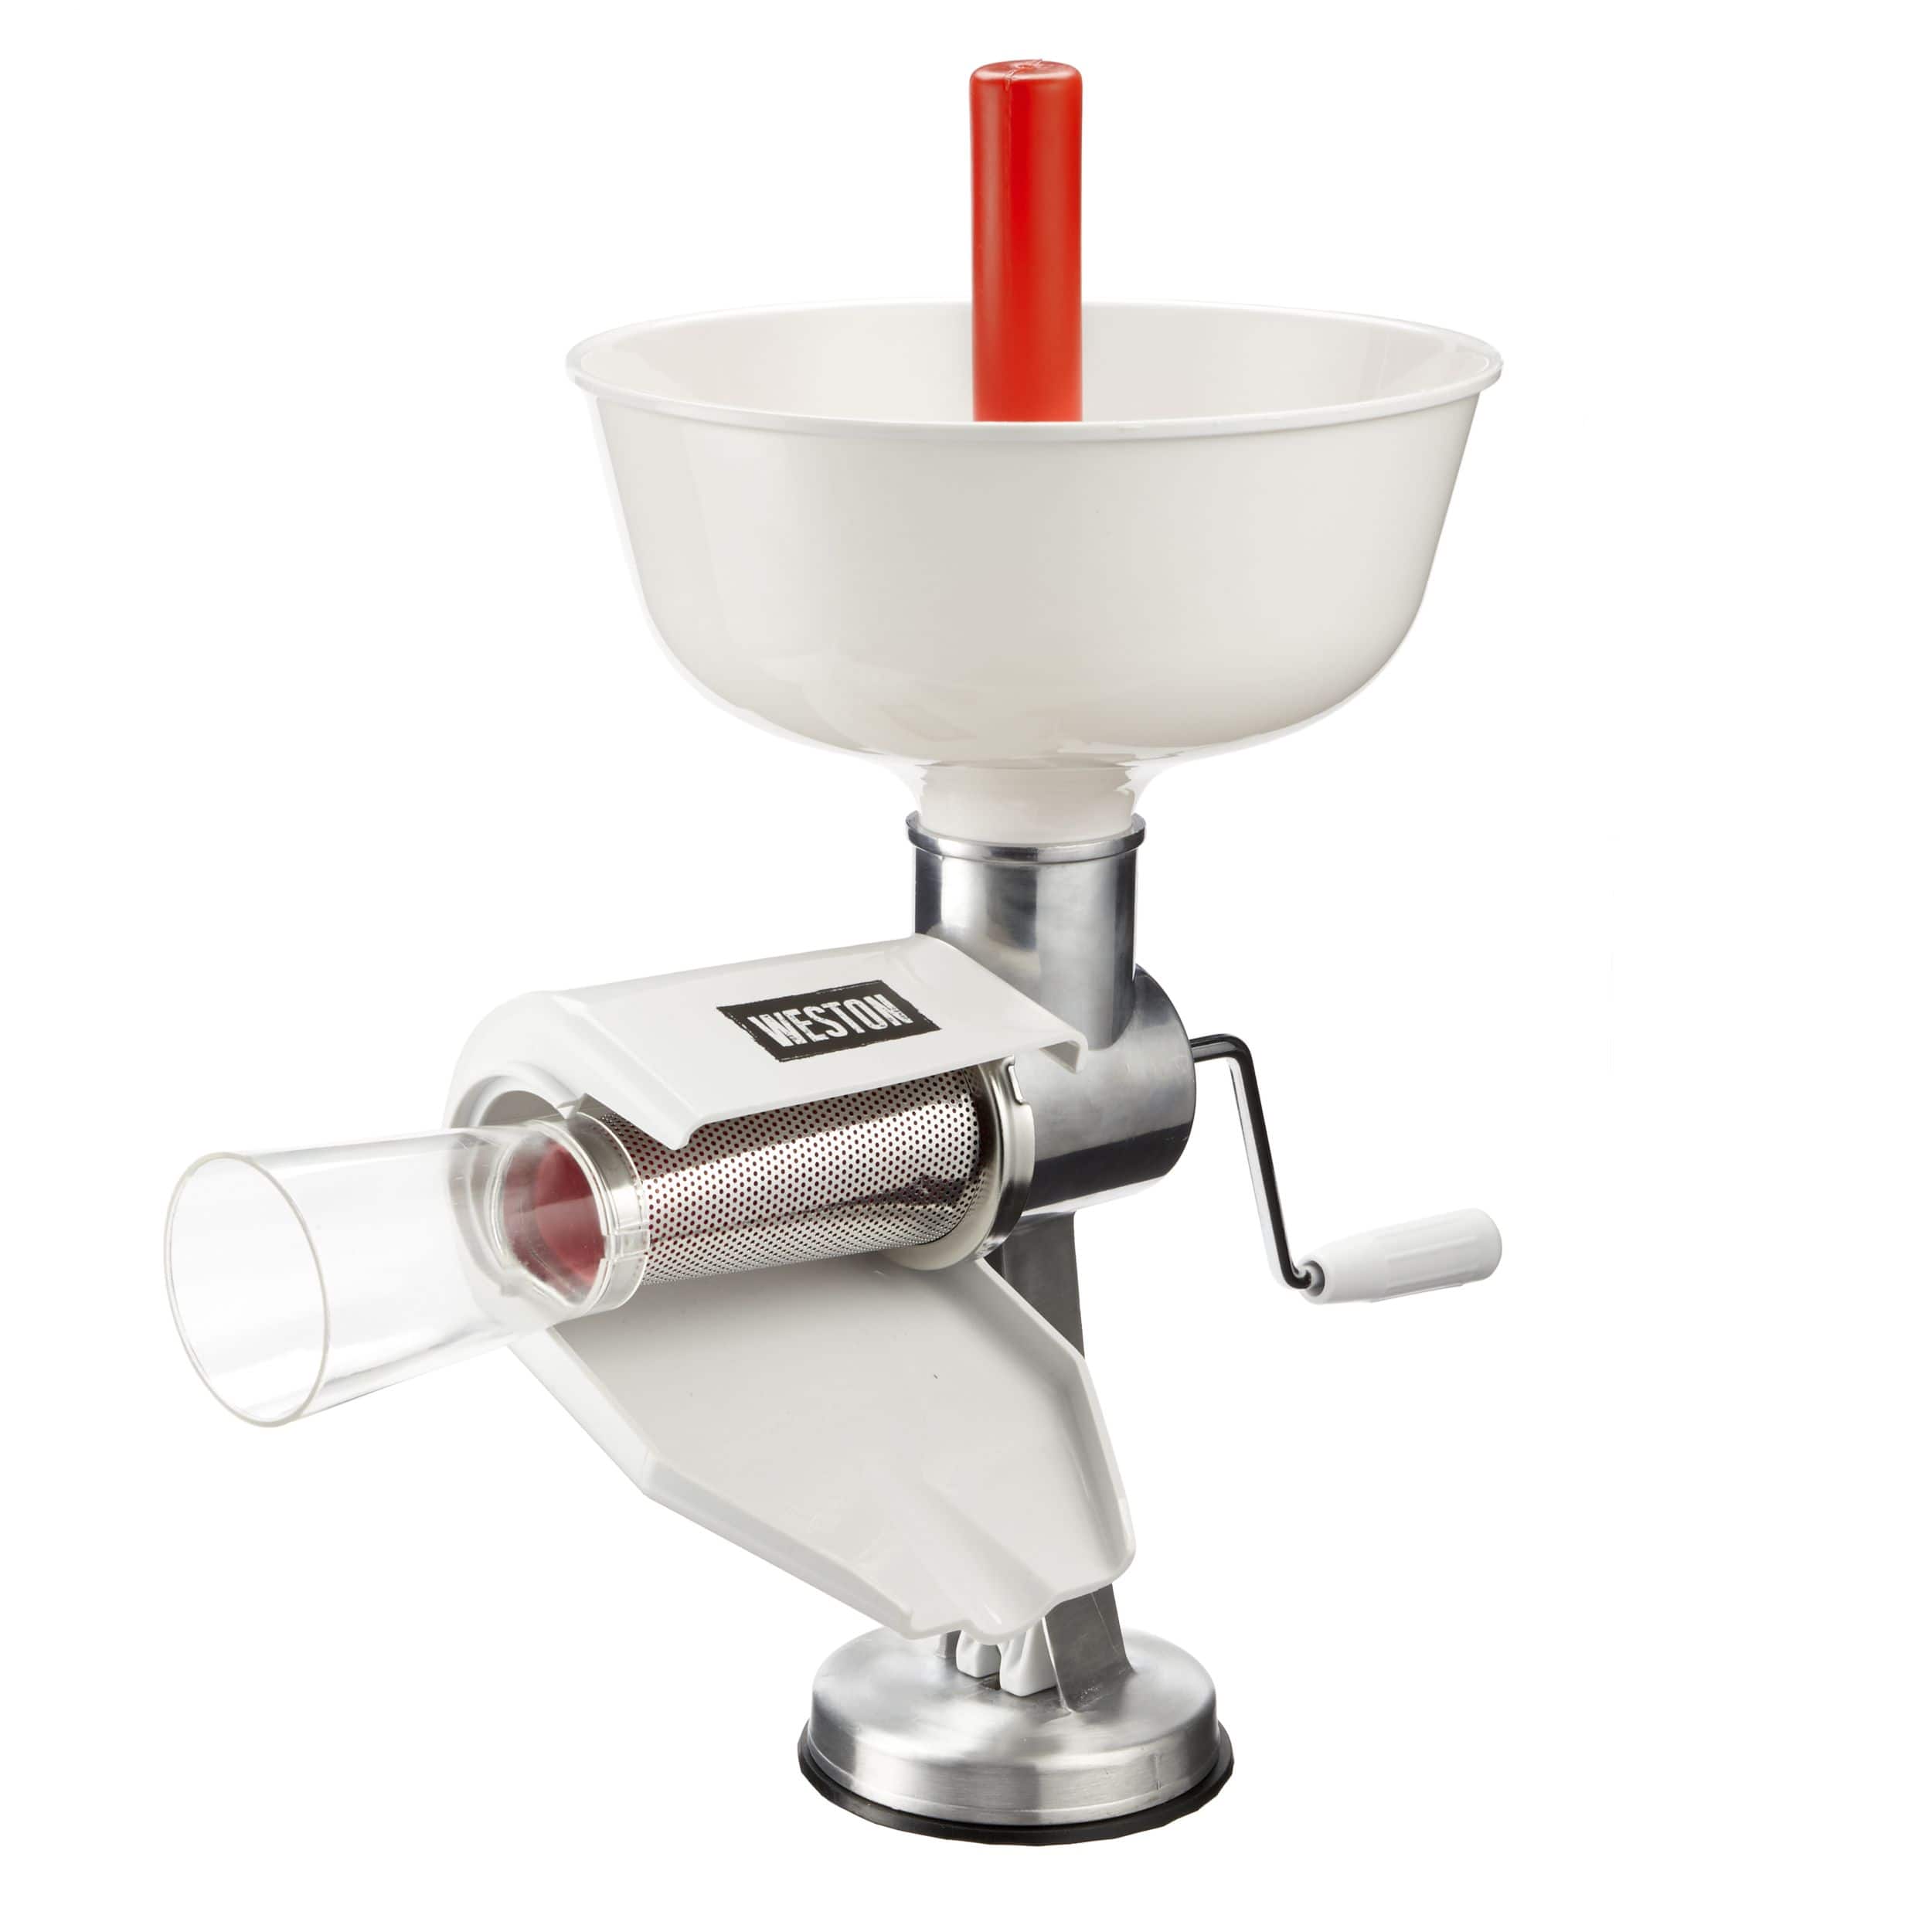 https://media-www.canadiantire.ca/product/living/kitchen/canning/1423803/weston-stainless-steel-tomato-press-sauce-maker-0591a45e-d963-4468-903c-47f079e49391-jpgrendition.jpg